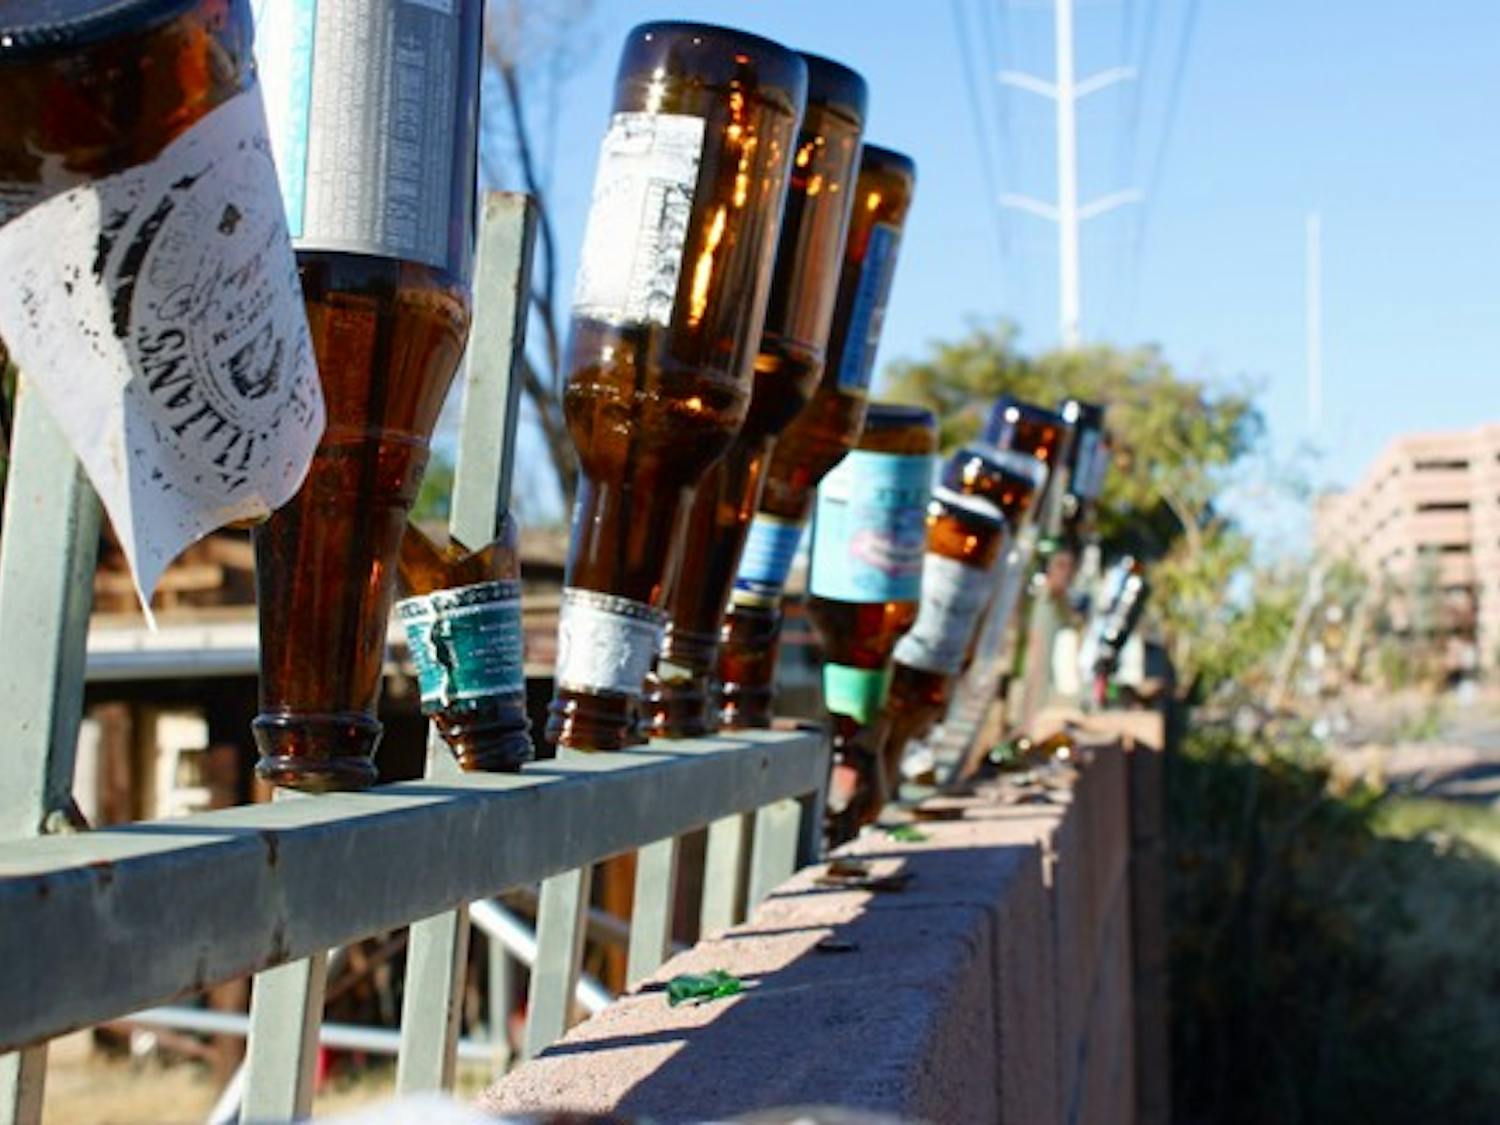 BOTTOMS UP: Bottles find a second life as decorations on the top of a fence a few blocks from the Tempe campus. (Photo by Rosie Gochnour)